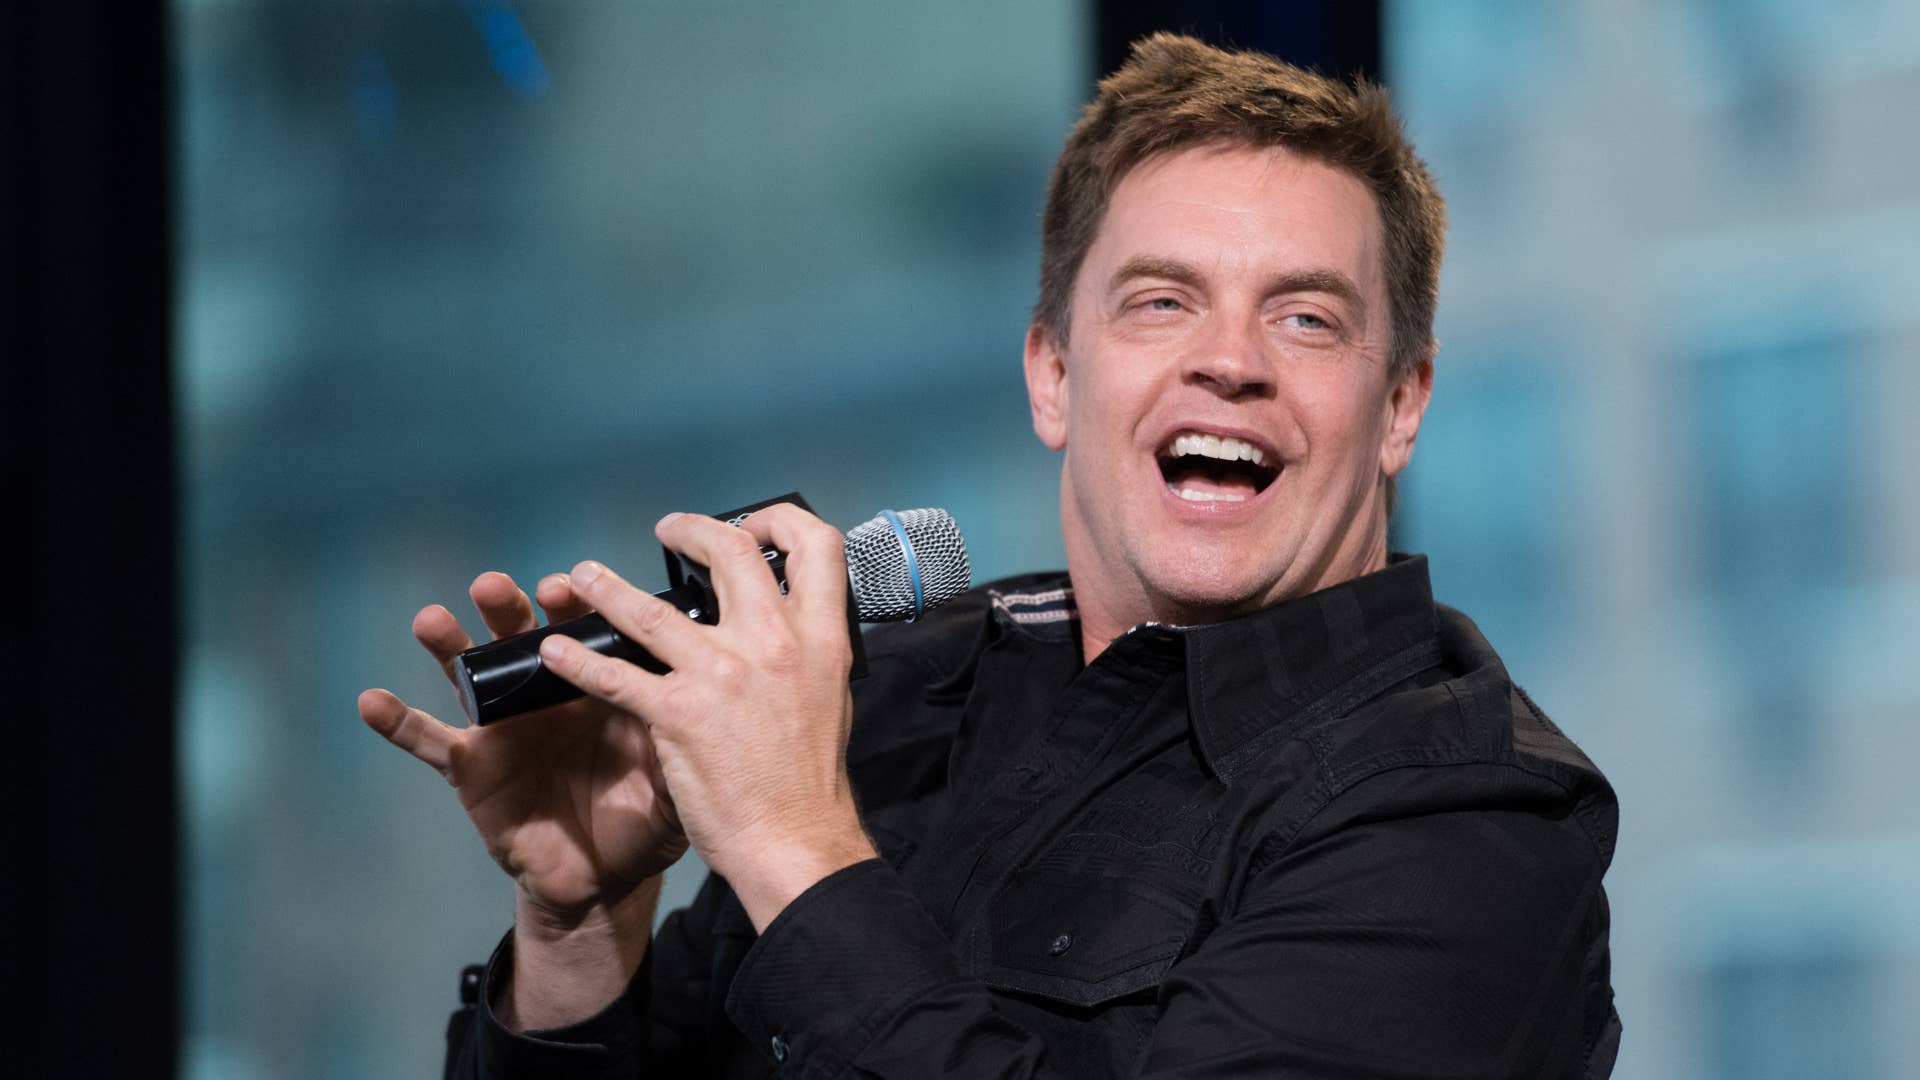 Jim Breuer visits AOL Build to discuss his album "Songs From The Garage."